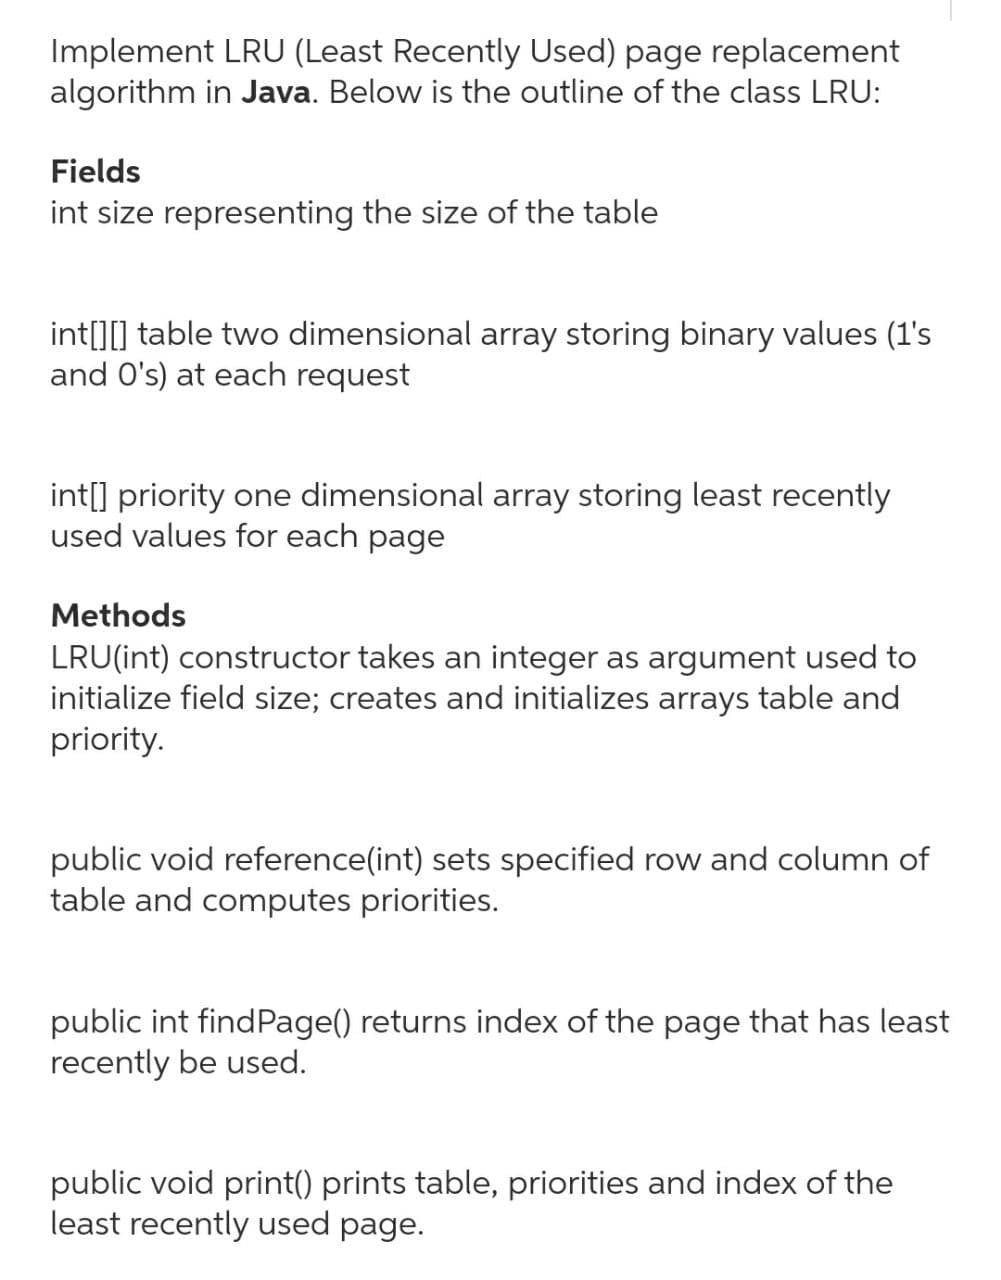 Implement LRU (Least Recently Used) page replacement
algorithm in Java. Below is the outline of the class LRU:
Fields
int size representing the size of the table
int[][] table two dimensional array storing binary values (1's
and O's) at each request
int[] priority one dimensional array storing least recently
used values for each page
Methods
LRU(int) constructor takes an integer as argument used to
initialize field size; creates and initializes arrays table and
priority.
public void reference(int) sets specified row and column of
table and computes priorities.
public int findPage() returns index of the page that has least
recently be used.
public void print() prints table, priorities and index of the
least recently used page.
